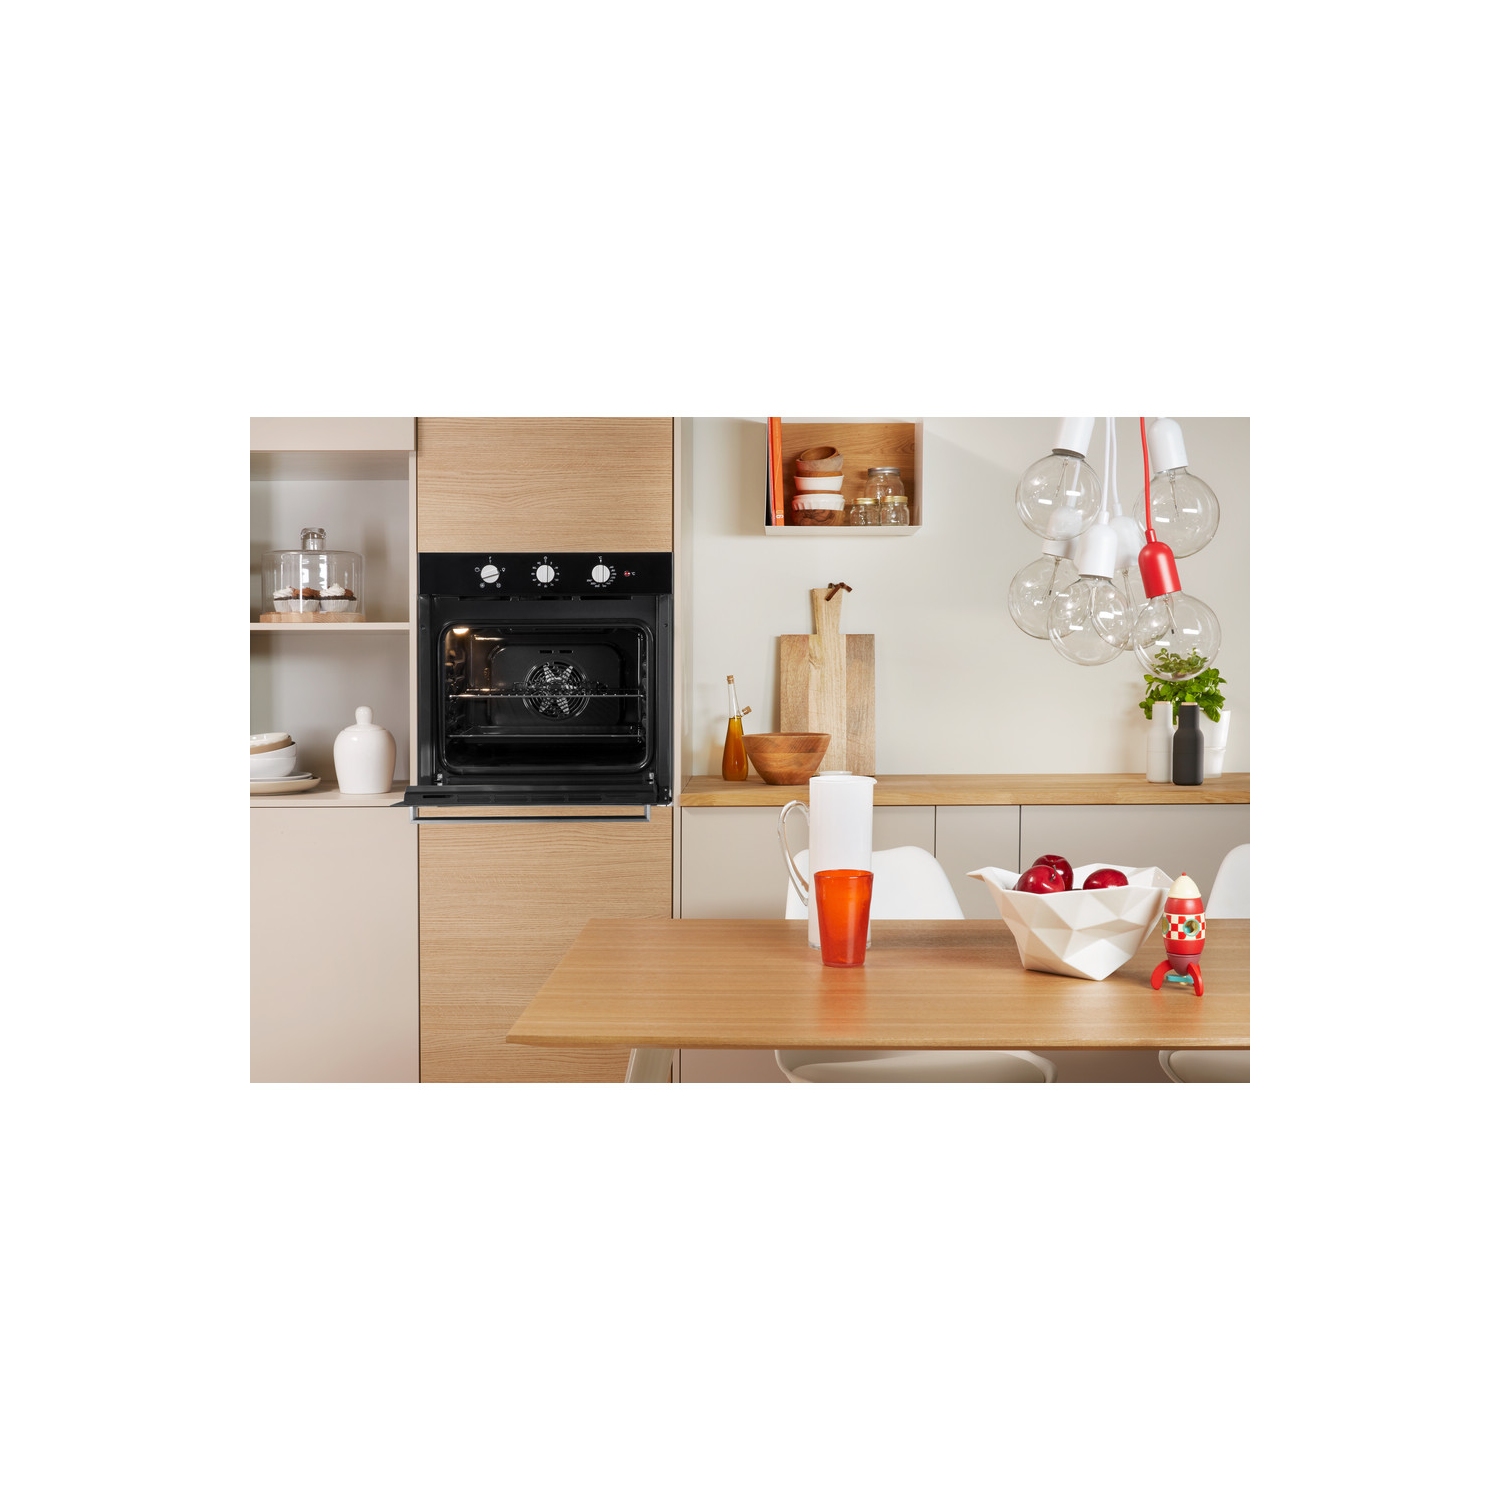 Indesit Built In Electric Single Oven - Black - A Rated - 10